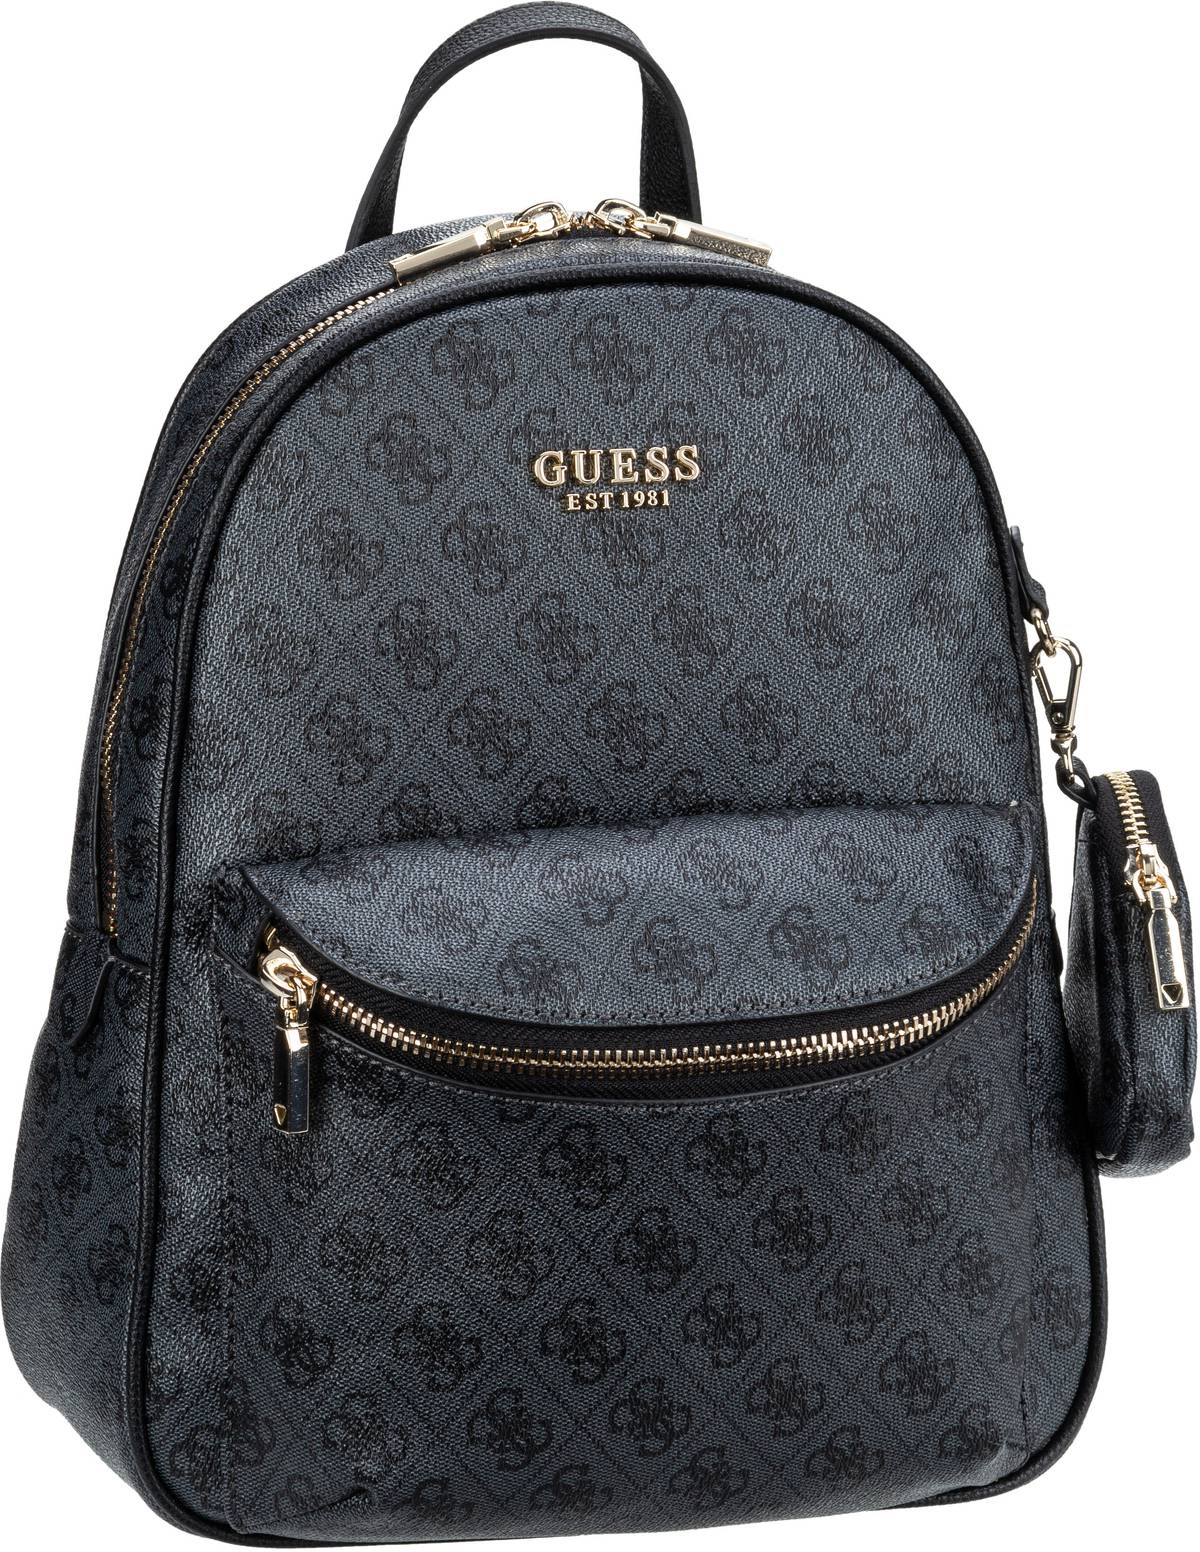 Guess House Party Large Backpack - Coal Logo